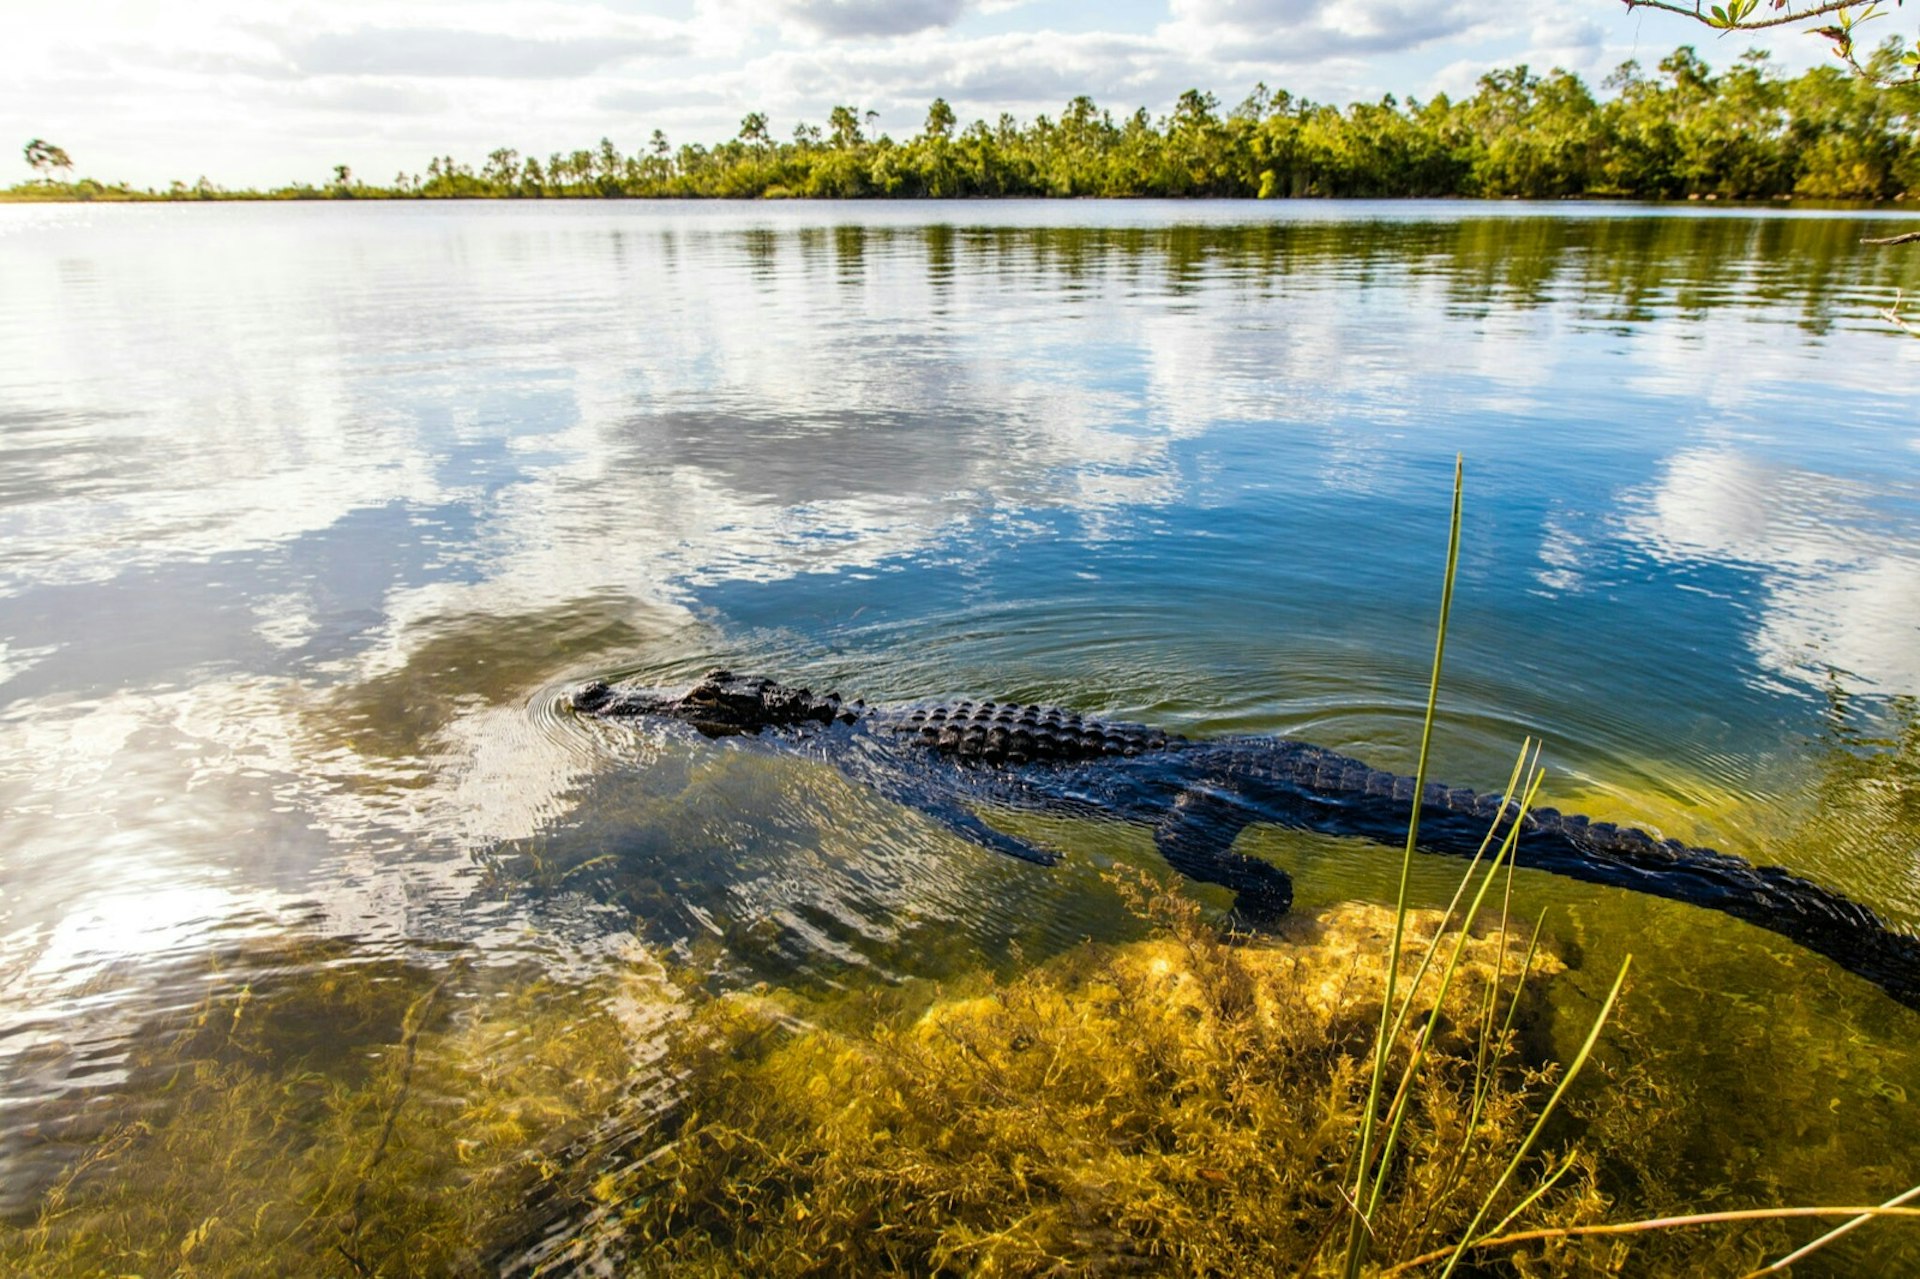 Side view of an alligator swimming in river against cloudy sky in the Everglades National Park, near Miami